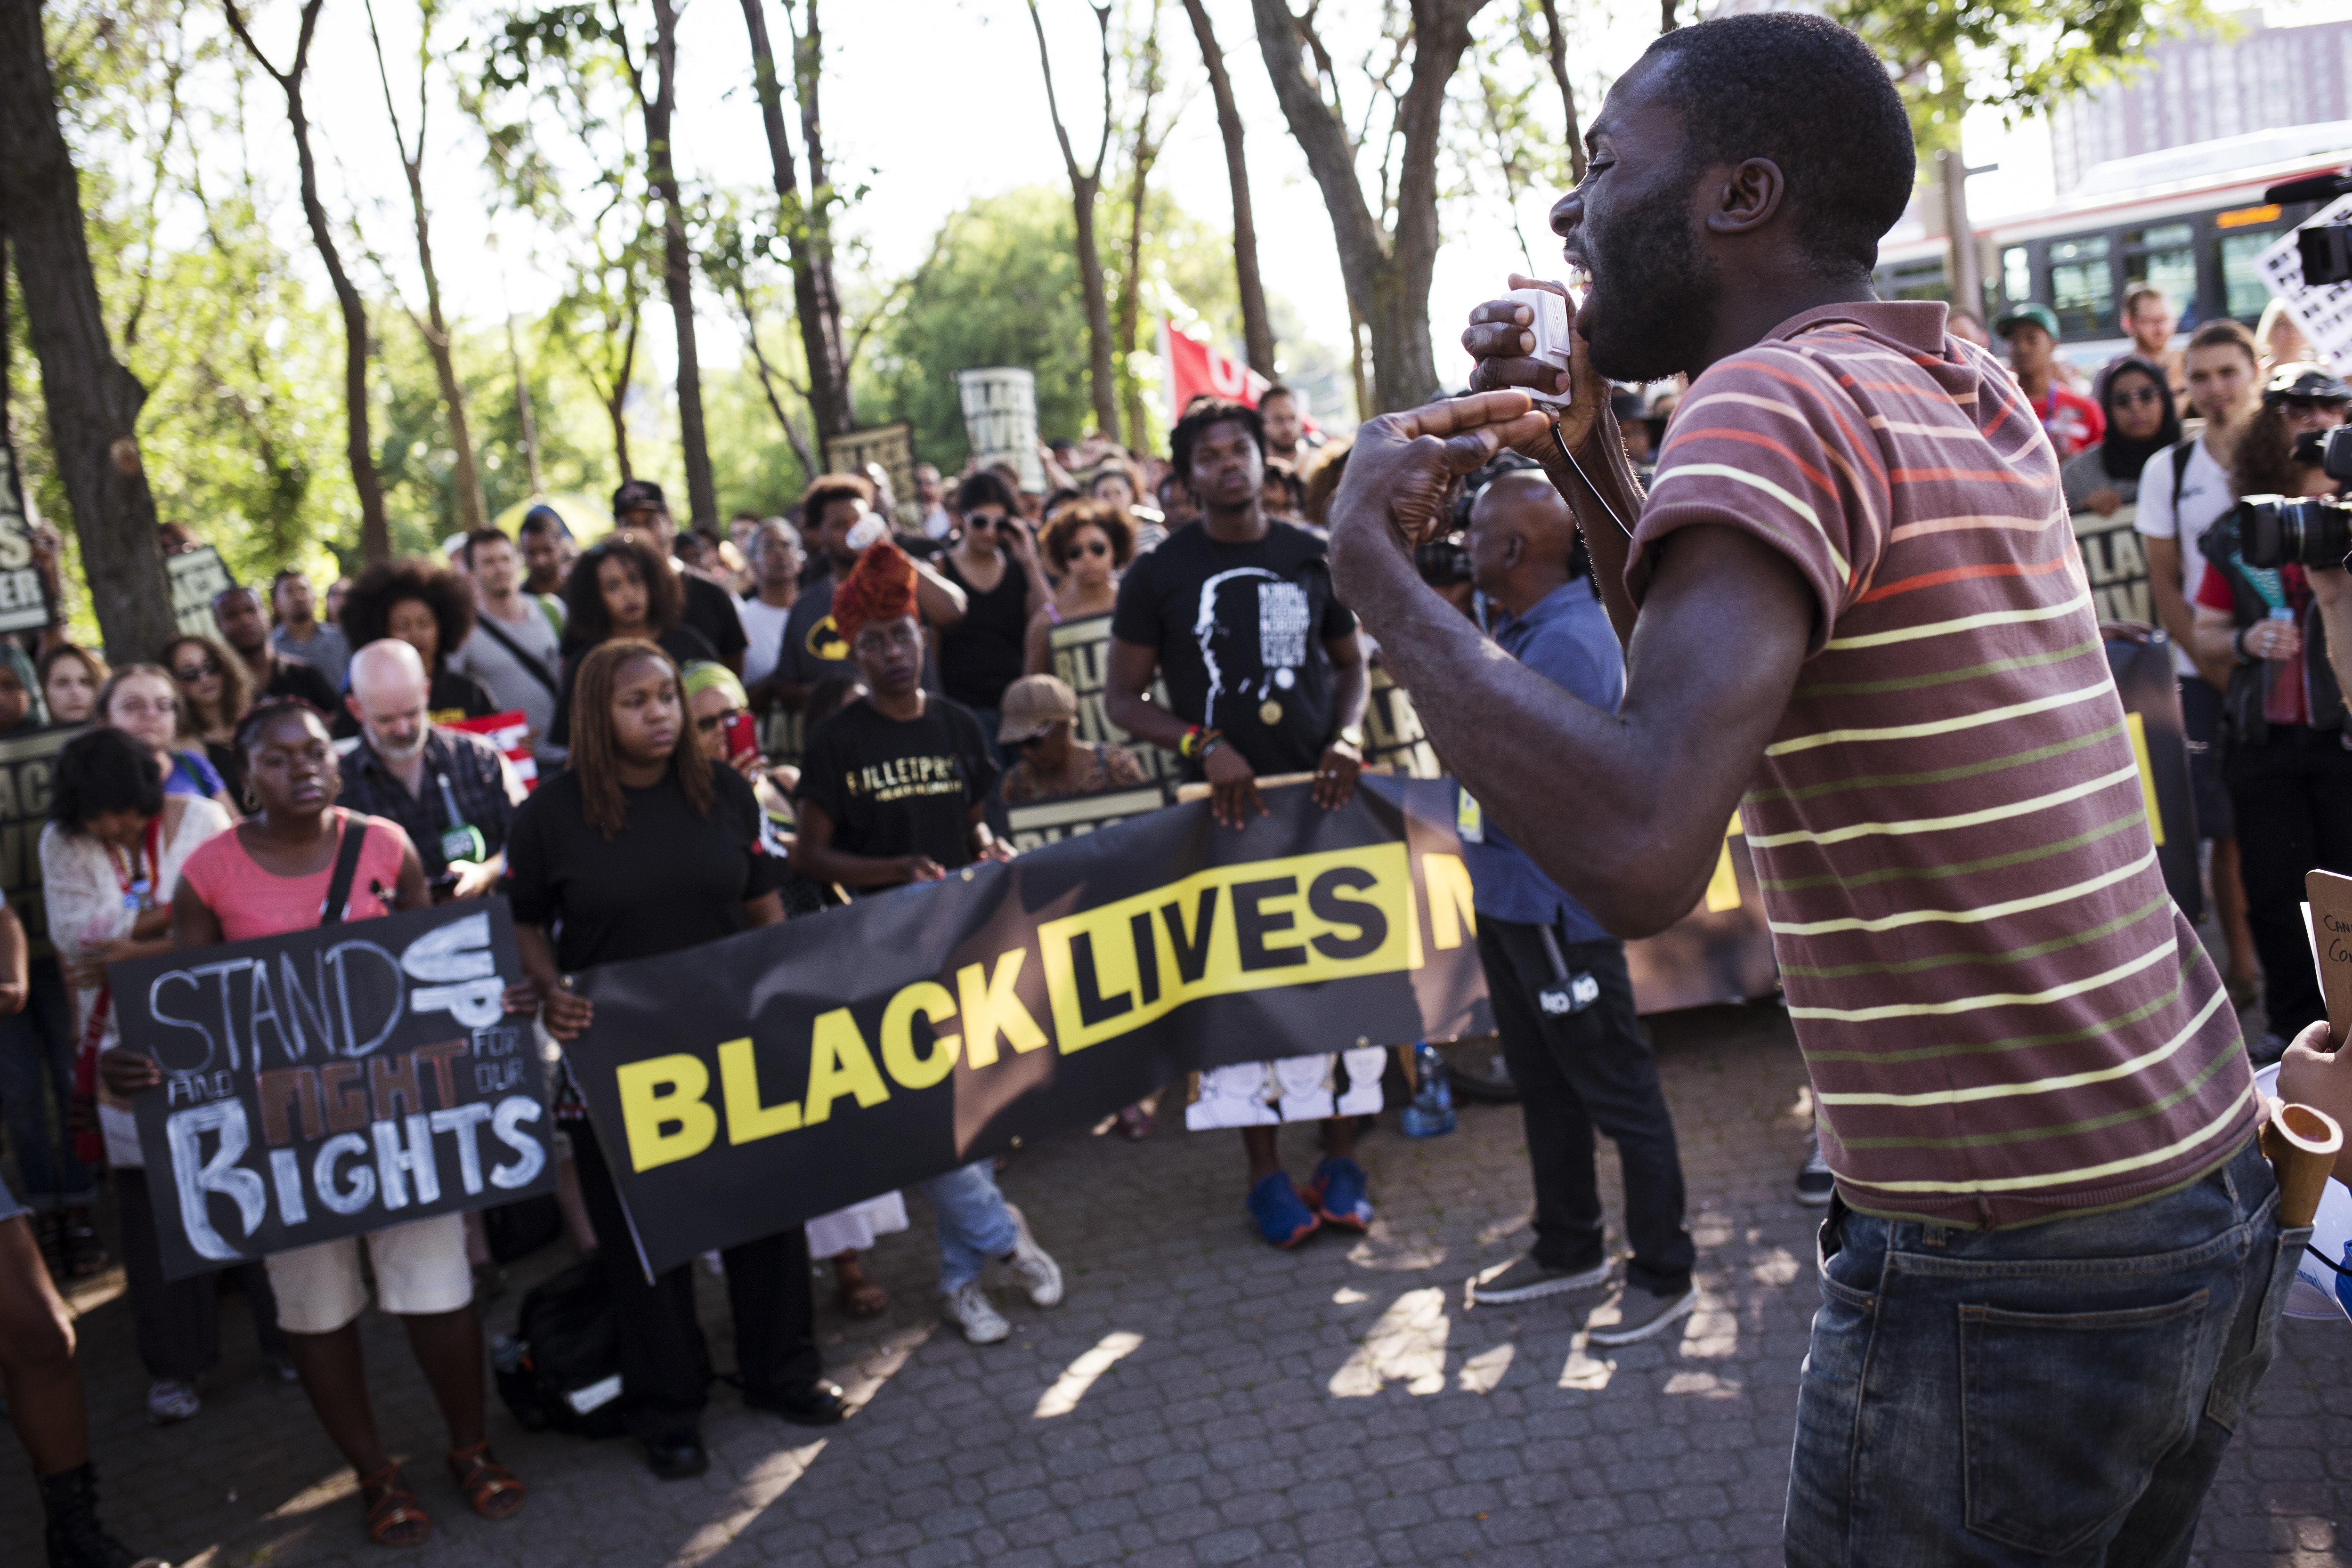 Former Toronto Star columnist Desmond Cole addresses the crowd at a Black Lives Matter protest in Toronto in July 2015. Cole left the paper in 2017, writing on his blog that “[i]f I must choose between a newspaper column and the actions I must take to liberate myself and my community, I choose activism in the service of Black liberation”